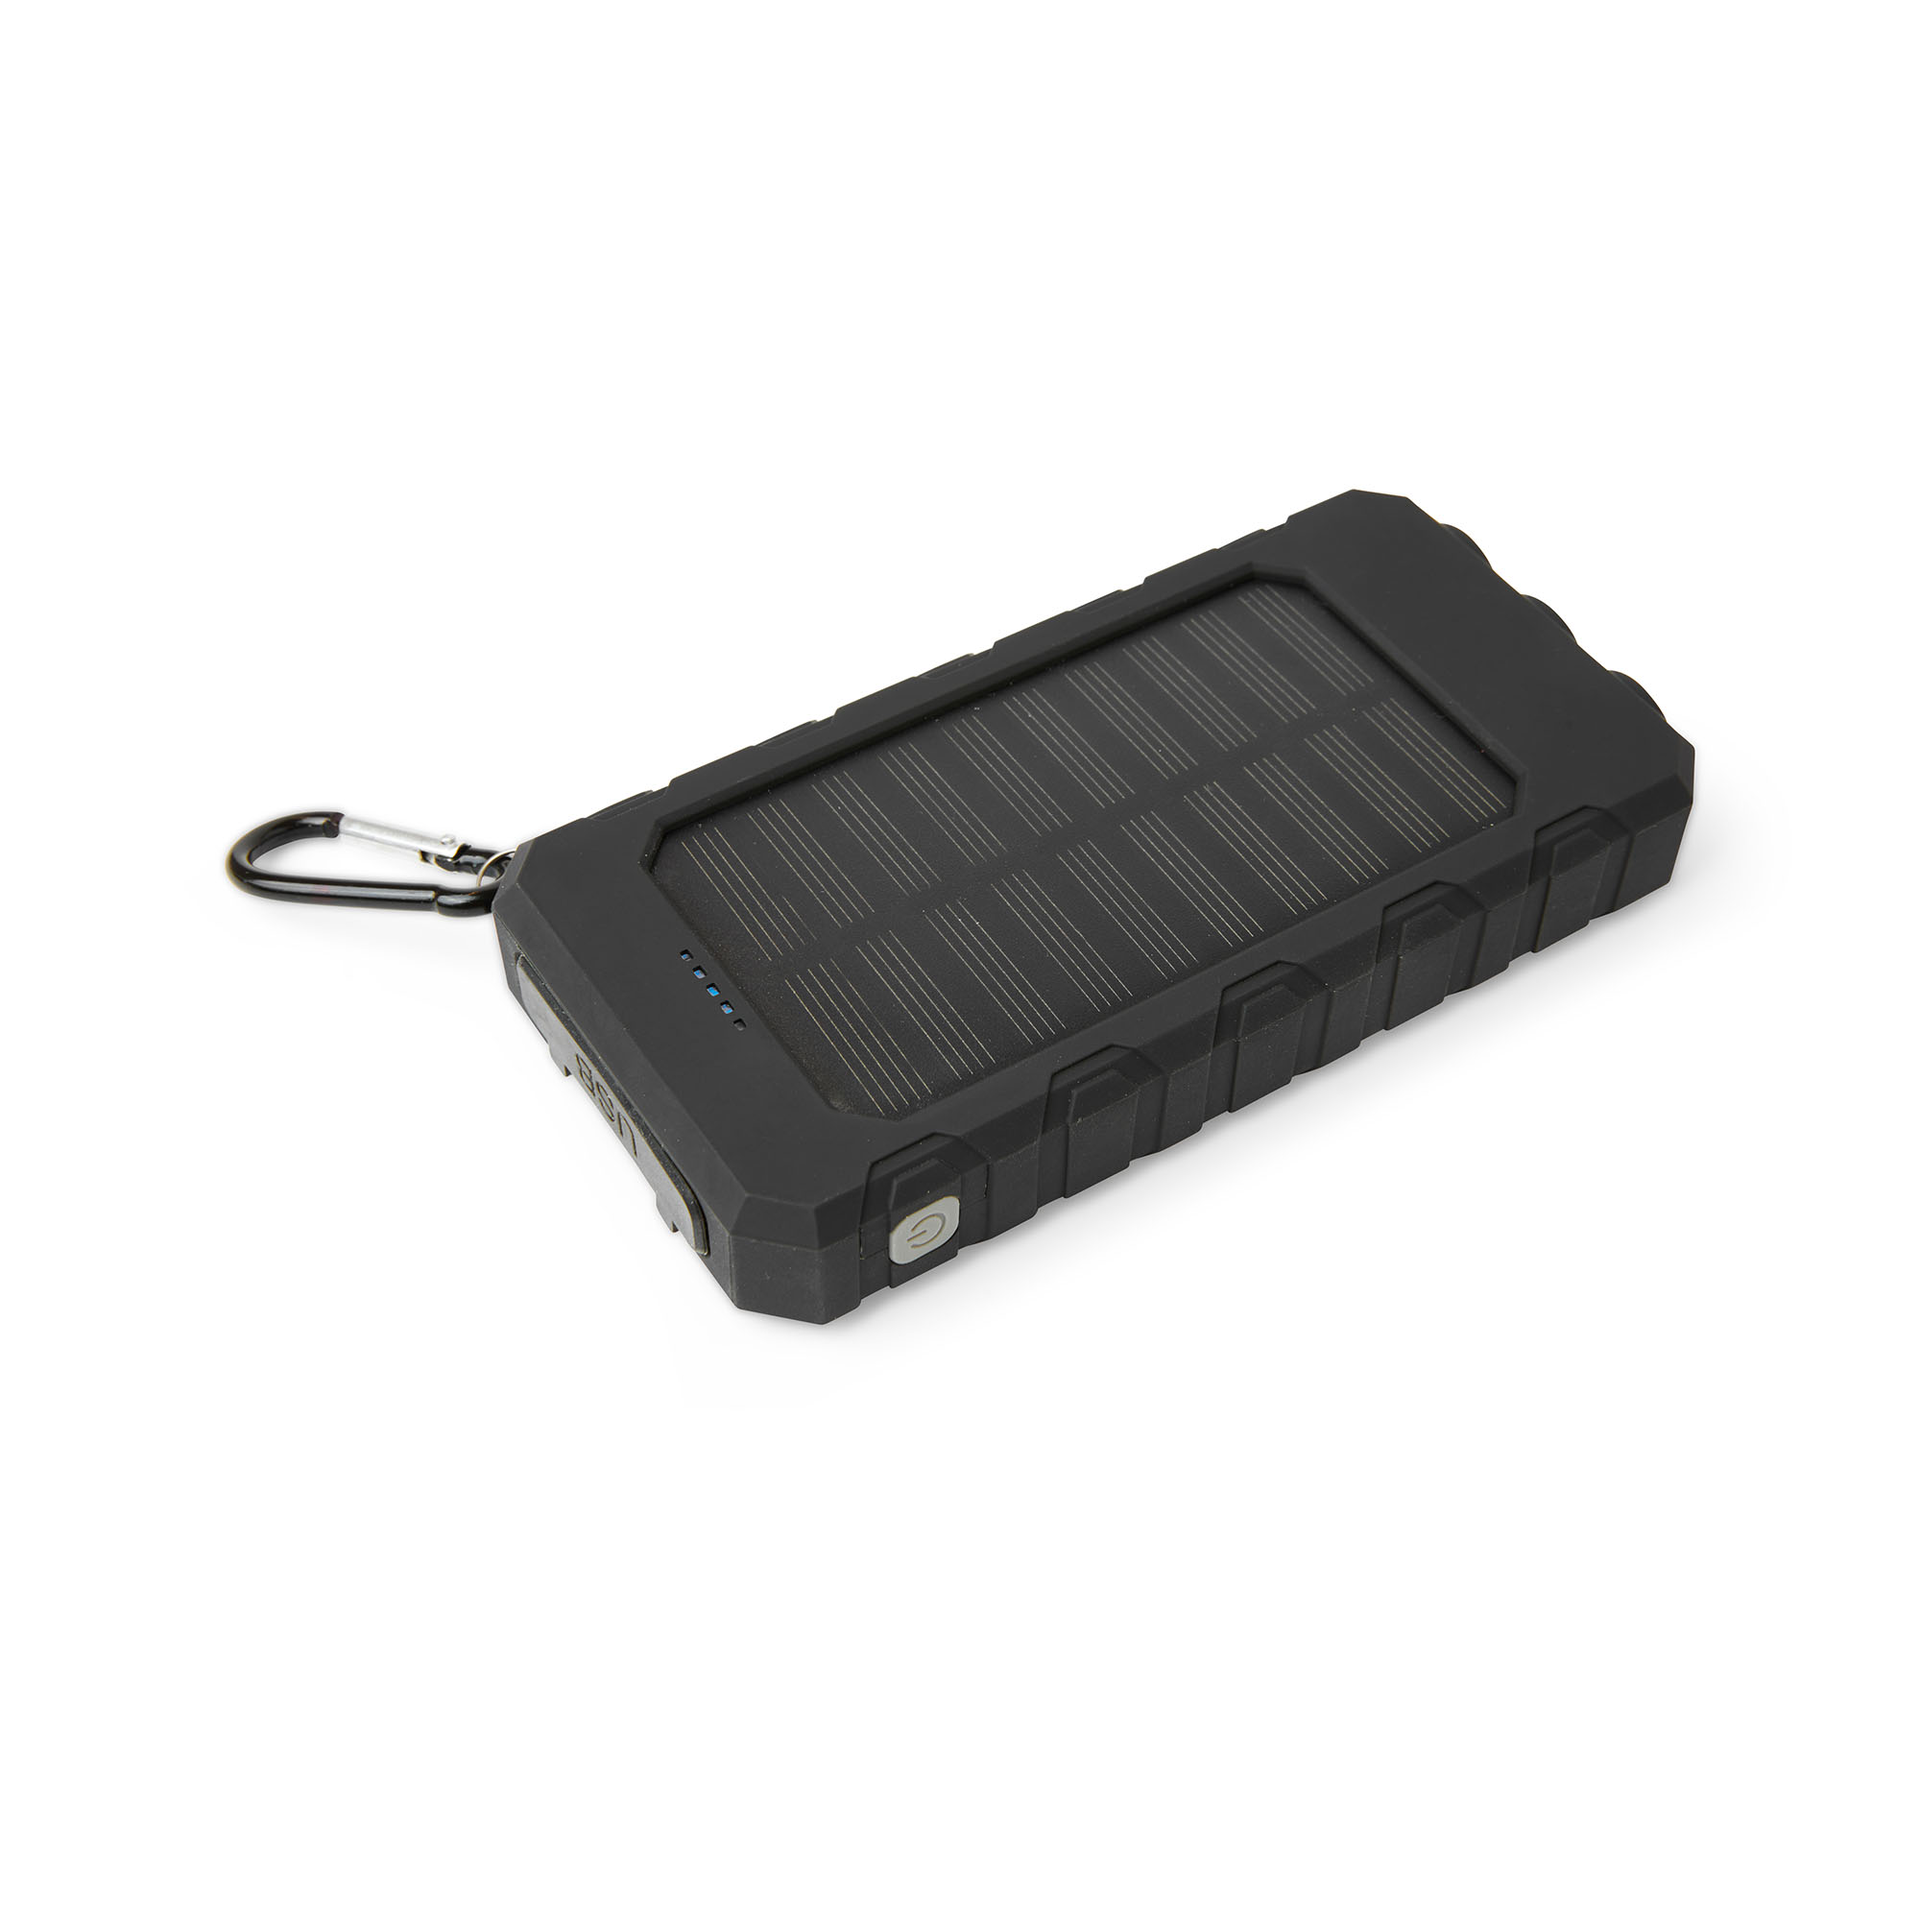 Power Bank Solare Con Torcia 8000 Mah, , large